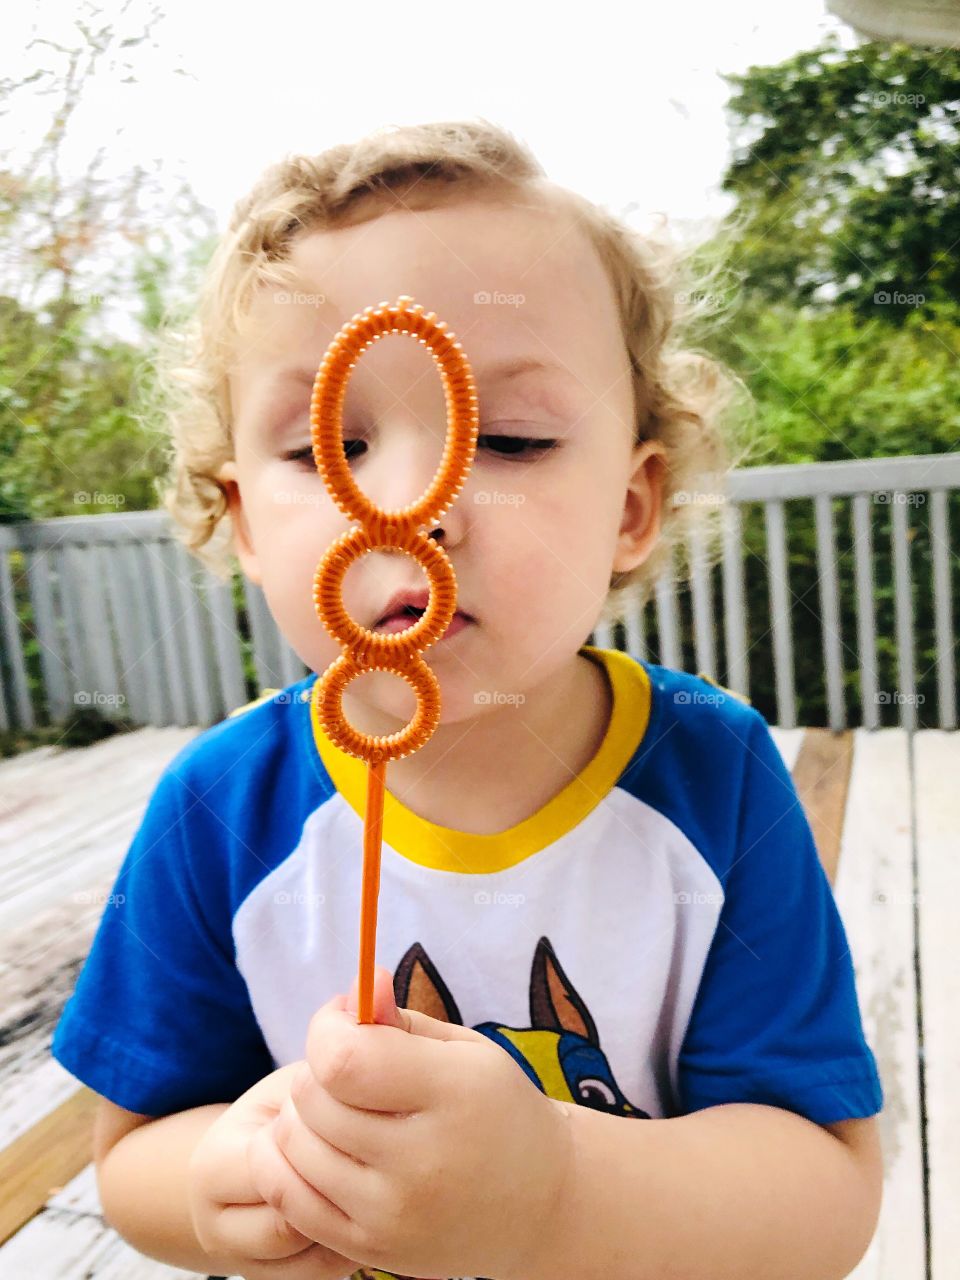 Toddler boy blowing bubbles outside on the deck having fun